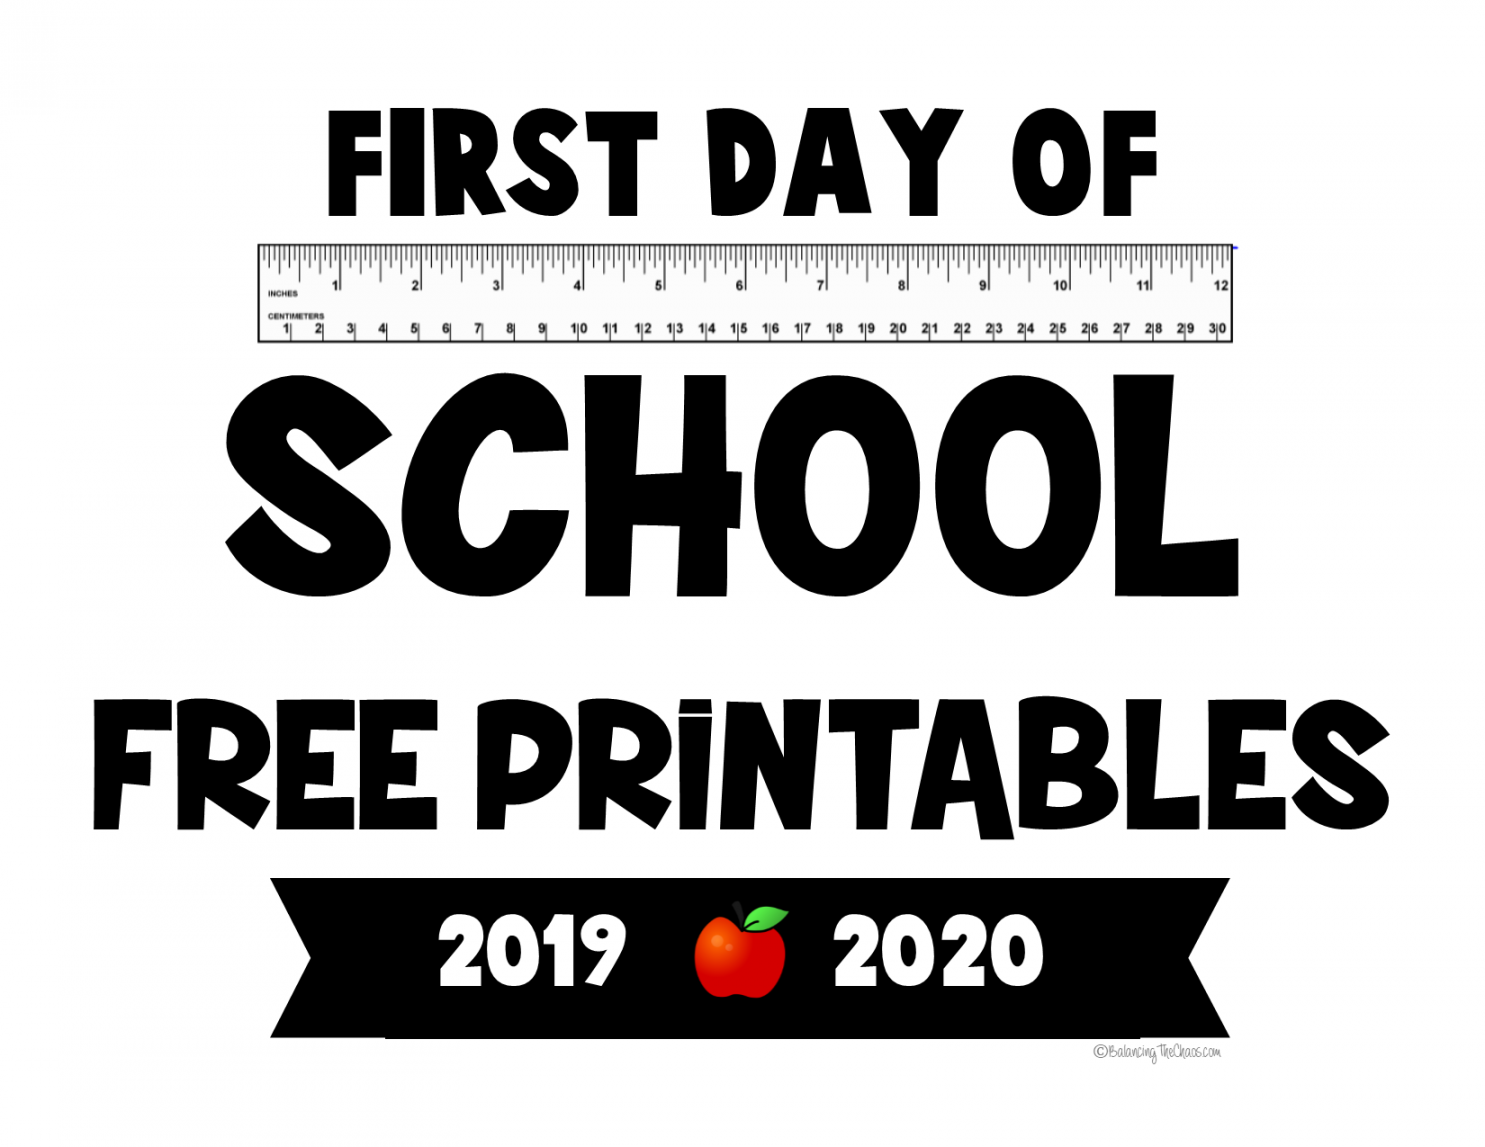 First Day of School Free Printables - Printable - FREE PRINTABLE:  -  First Day of School Signs - Balancing